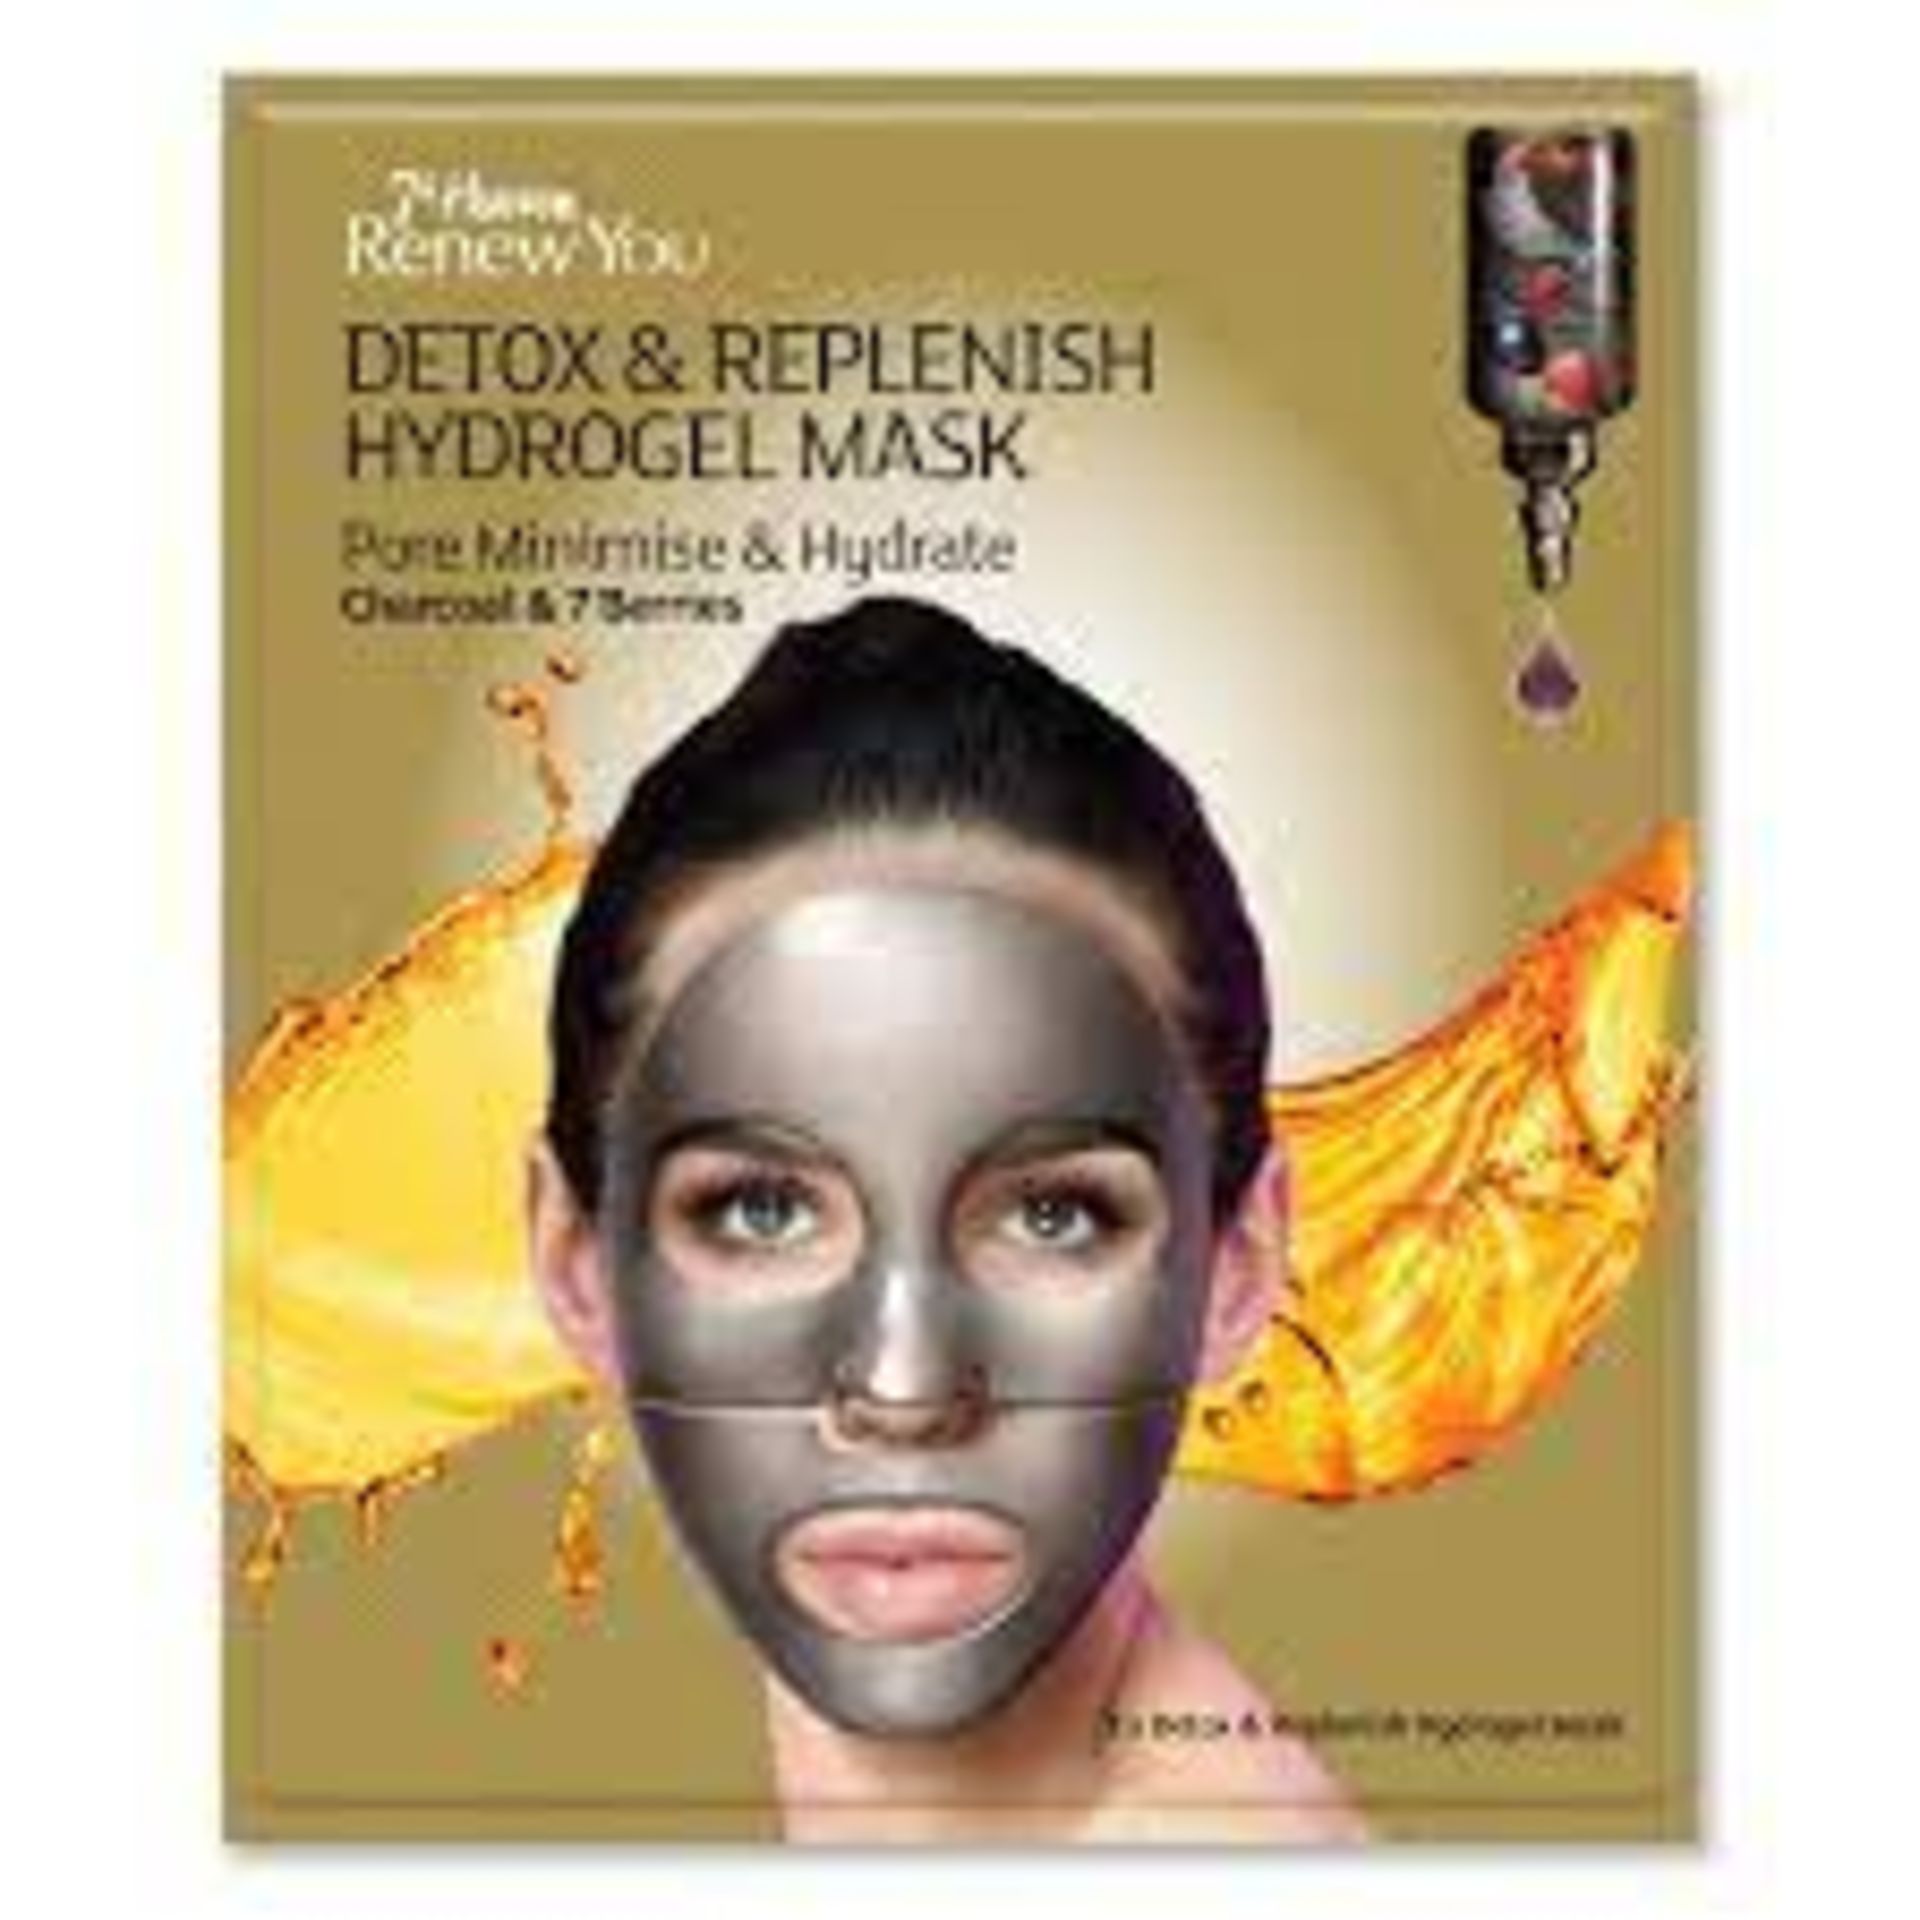 228 X BRAND NEW 7TH HEAVEN RENEW YOU DETOX AND REPLENISH HYDROGEL MASKS, PORE MINIMISE AND HYDRATE